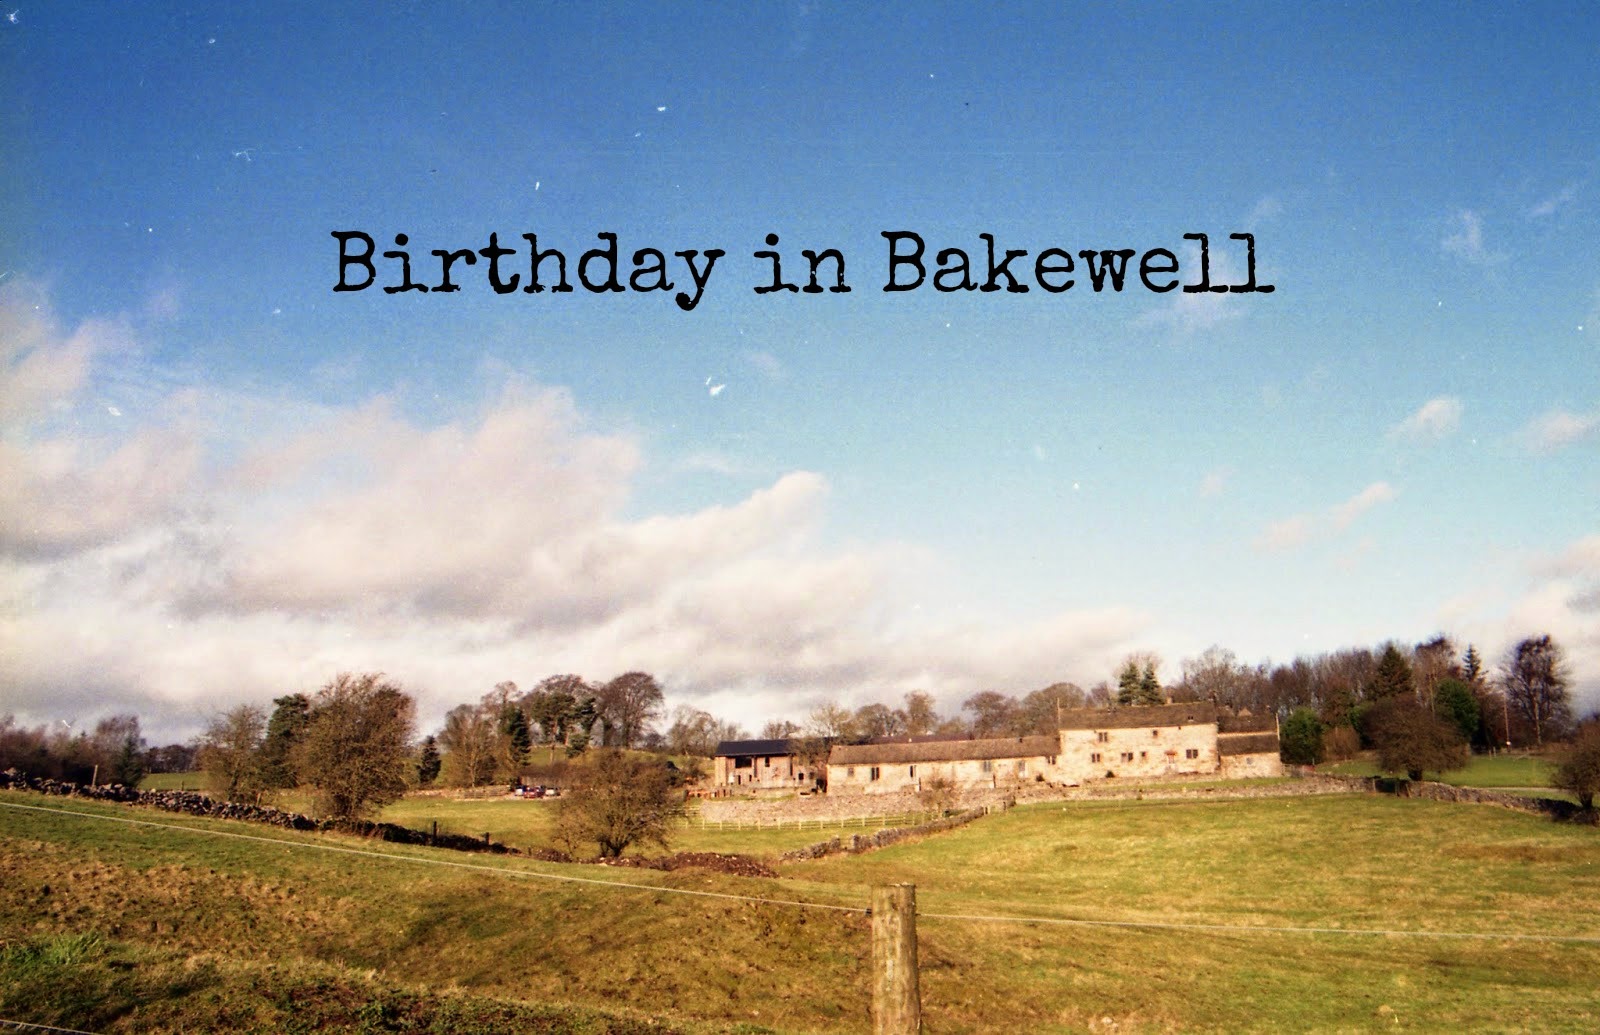 http://talesonfilm.blogspot.co.uk/2014/03/birthday-in-bakewell.html